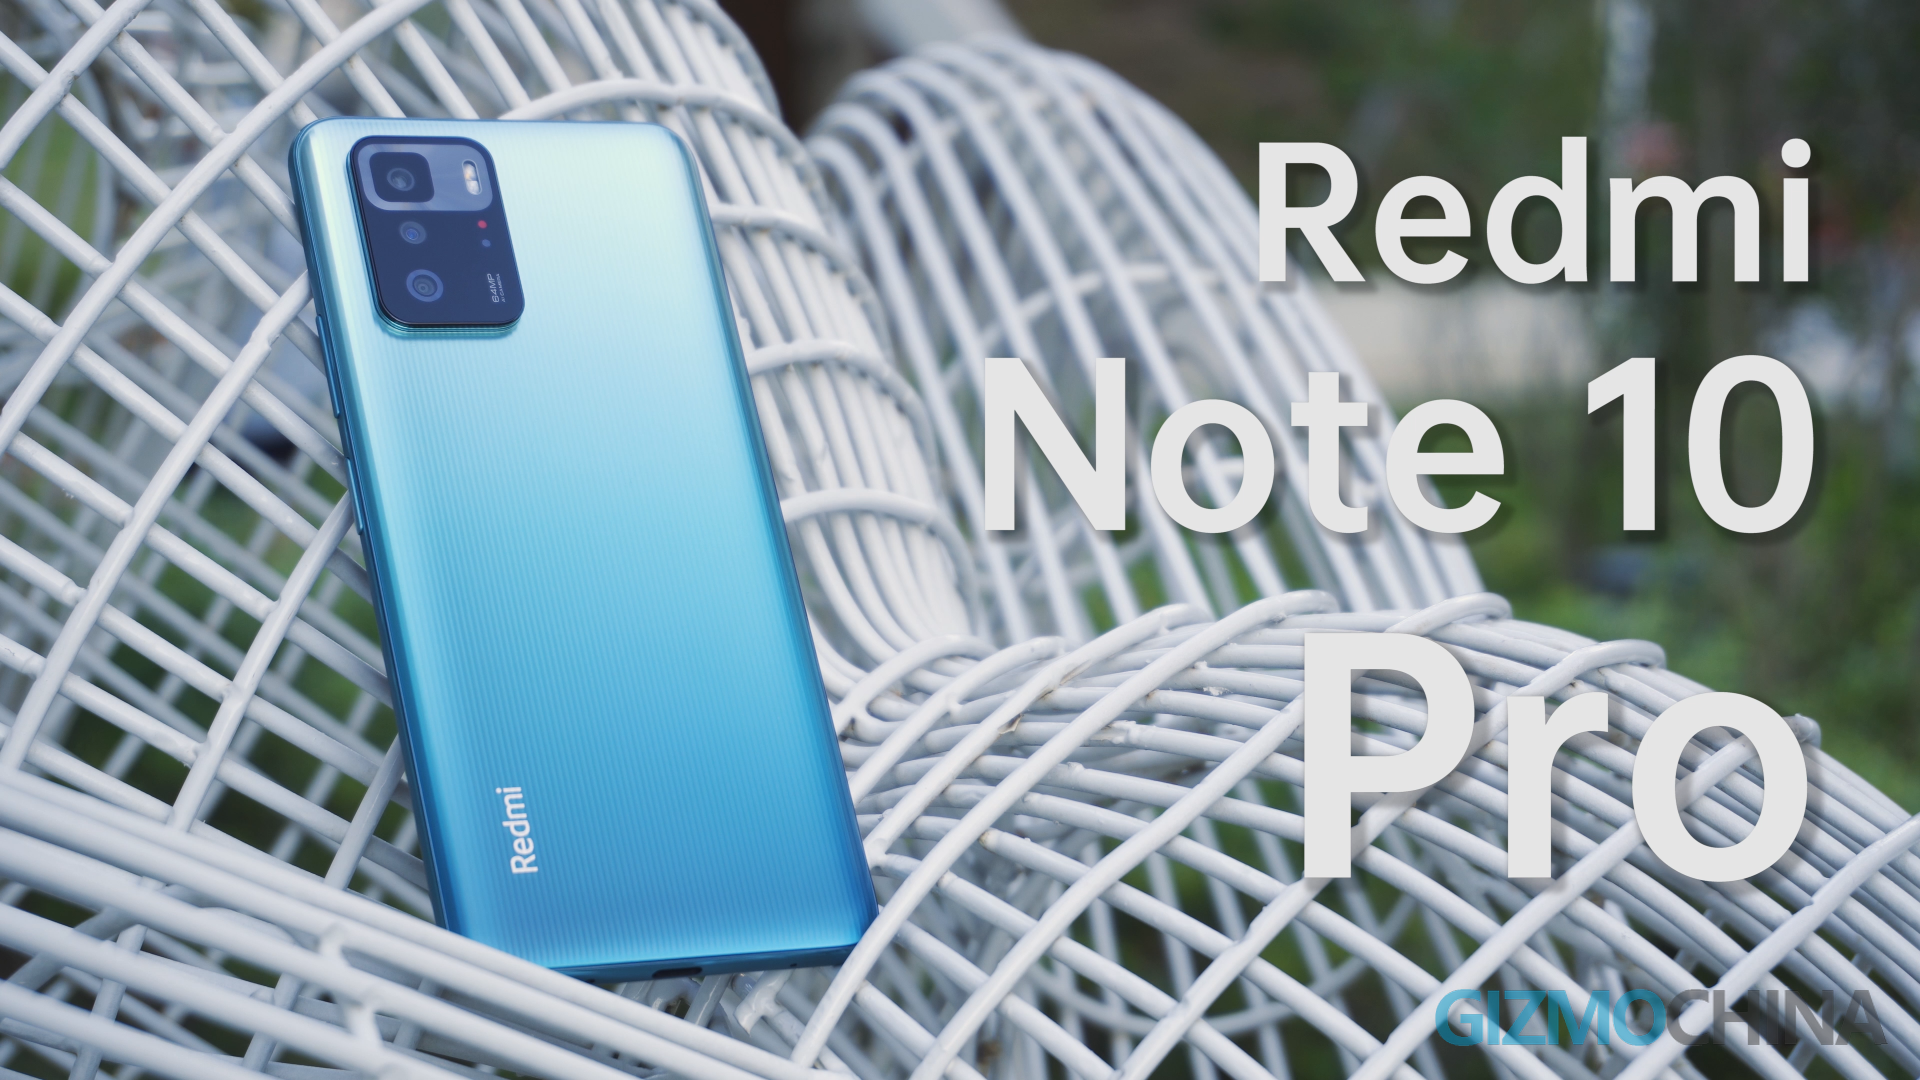 Xiaomi Redmi Note 10 Pro 4G - Specs, Price, Reviews, and Best Deals